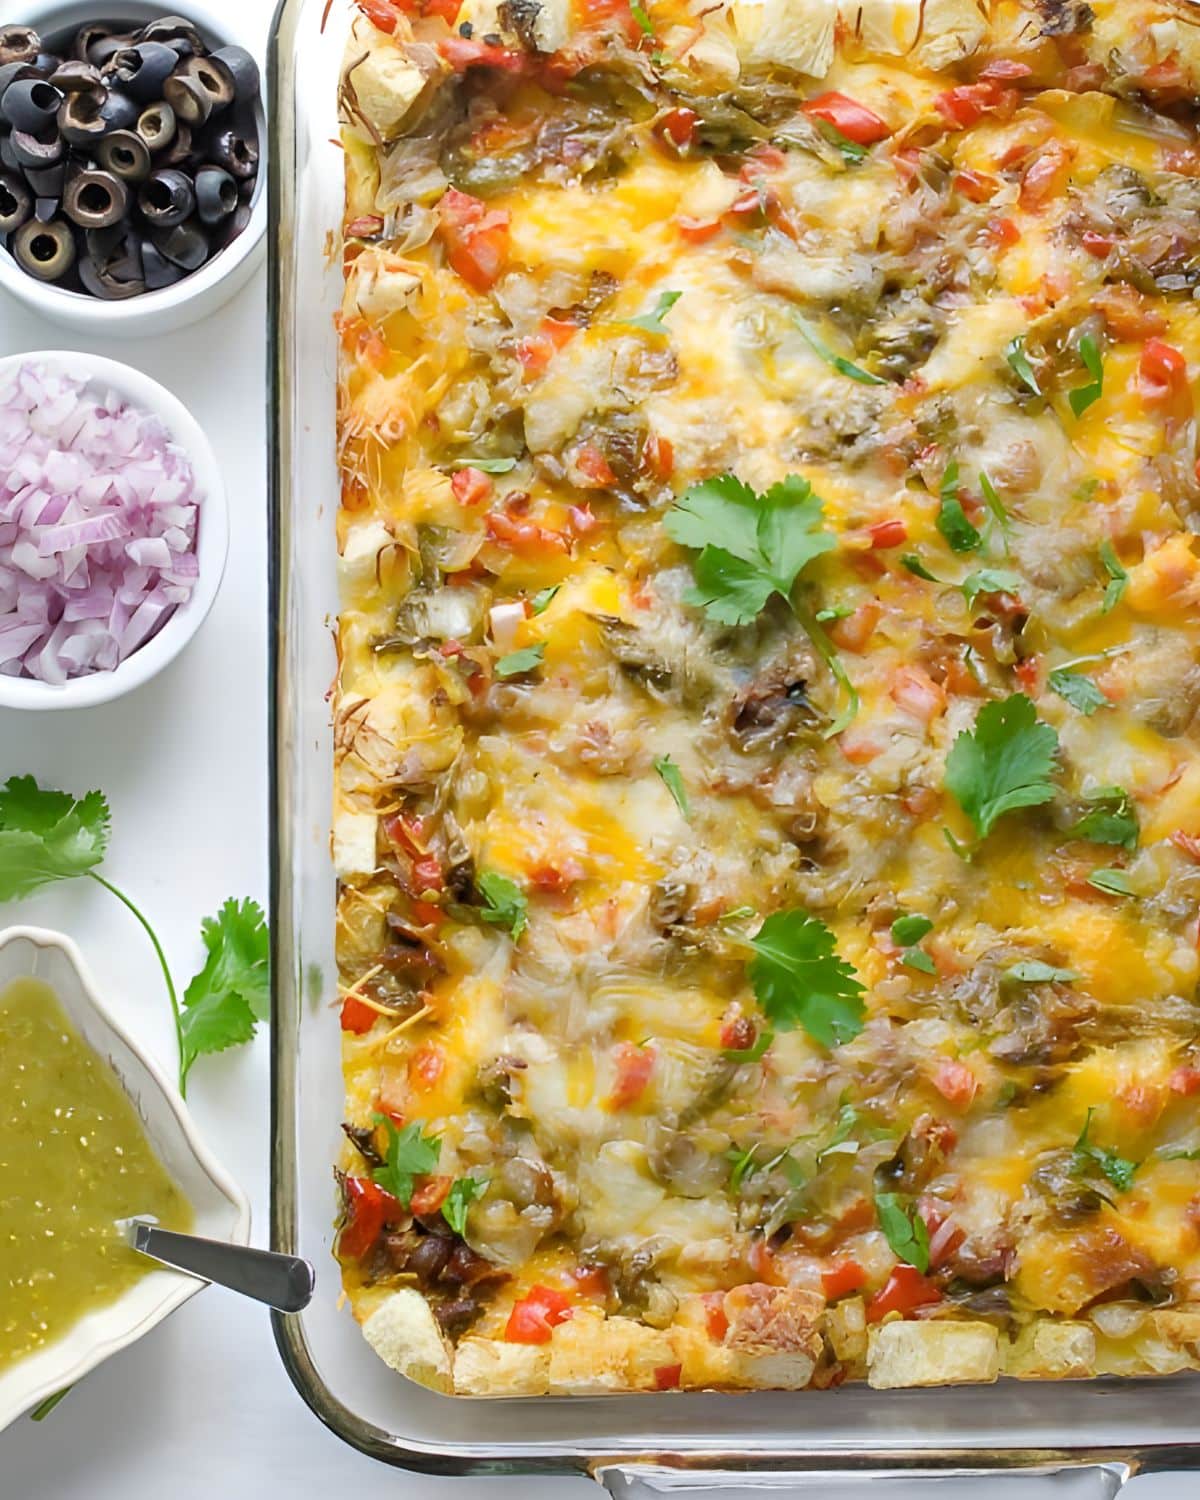 A breakfast strata with hatch chiles and toppings.